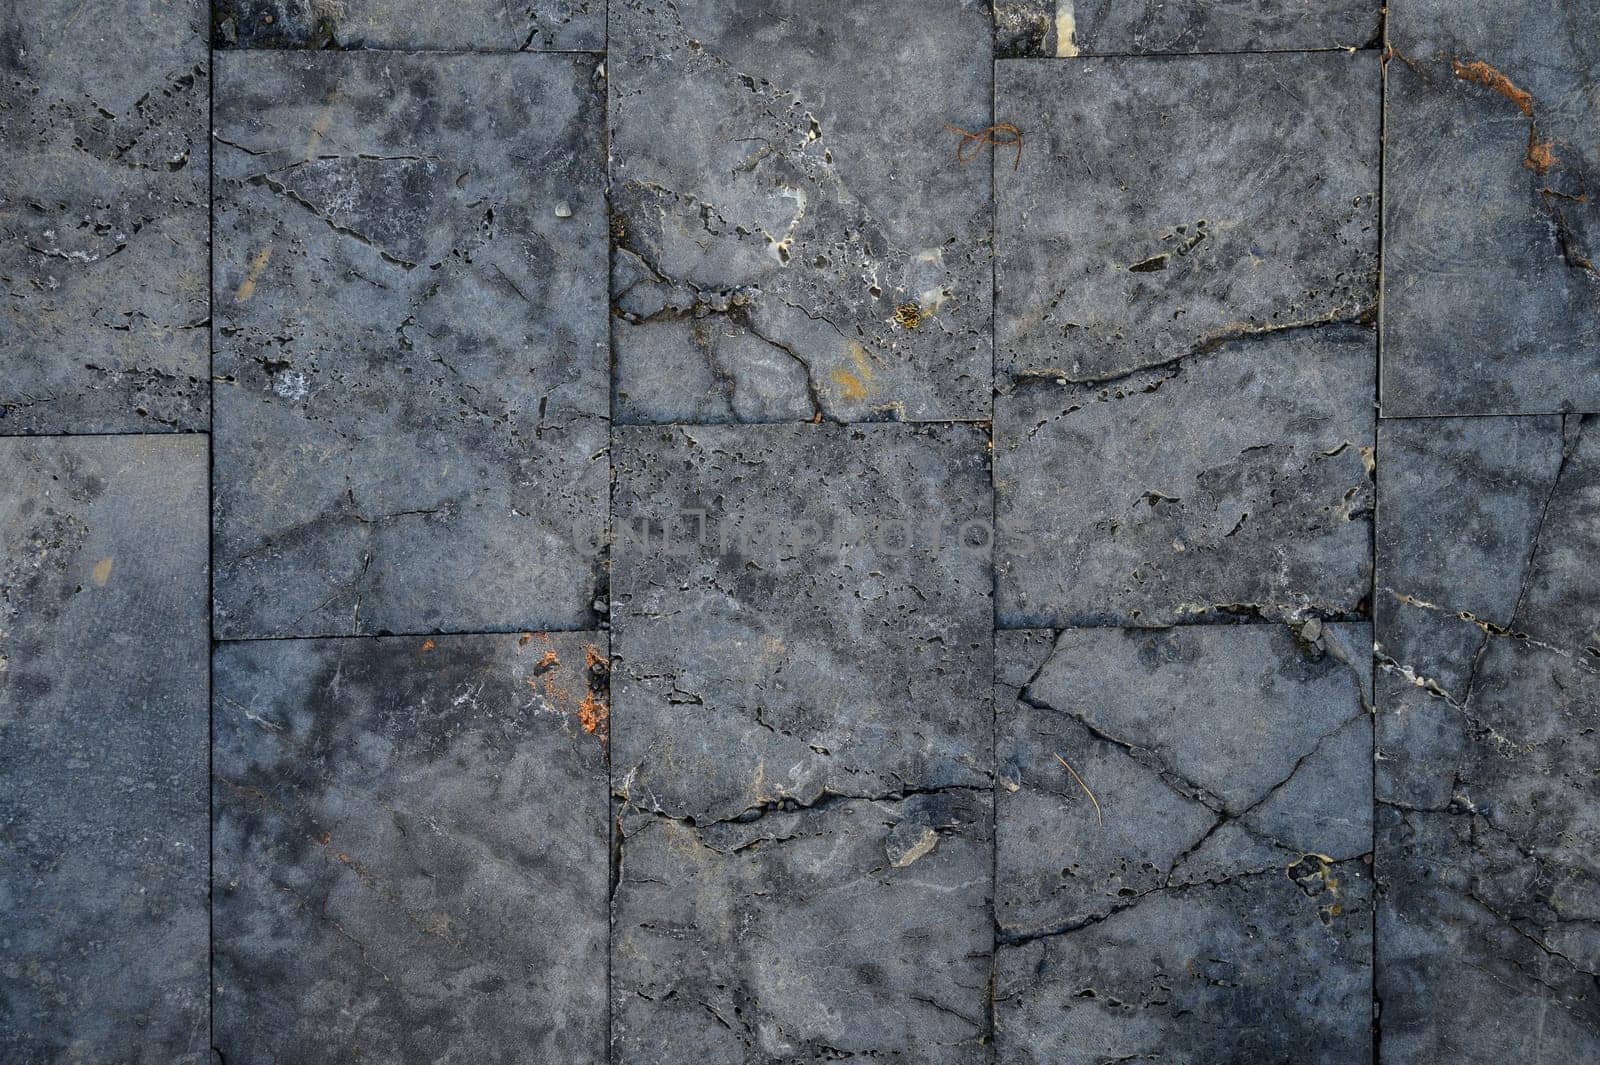 pavement path made of polished real stone as a background 2 by Mixa74